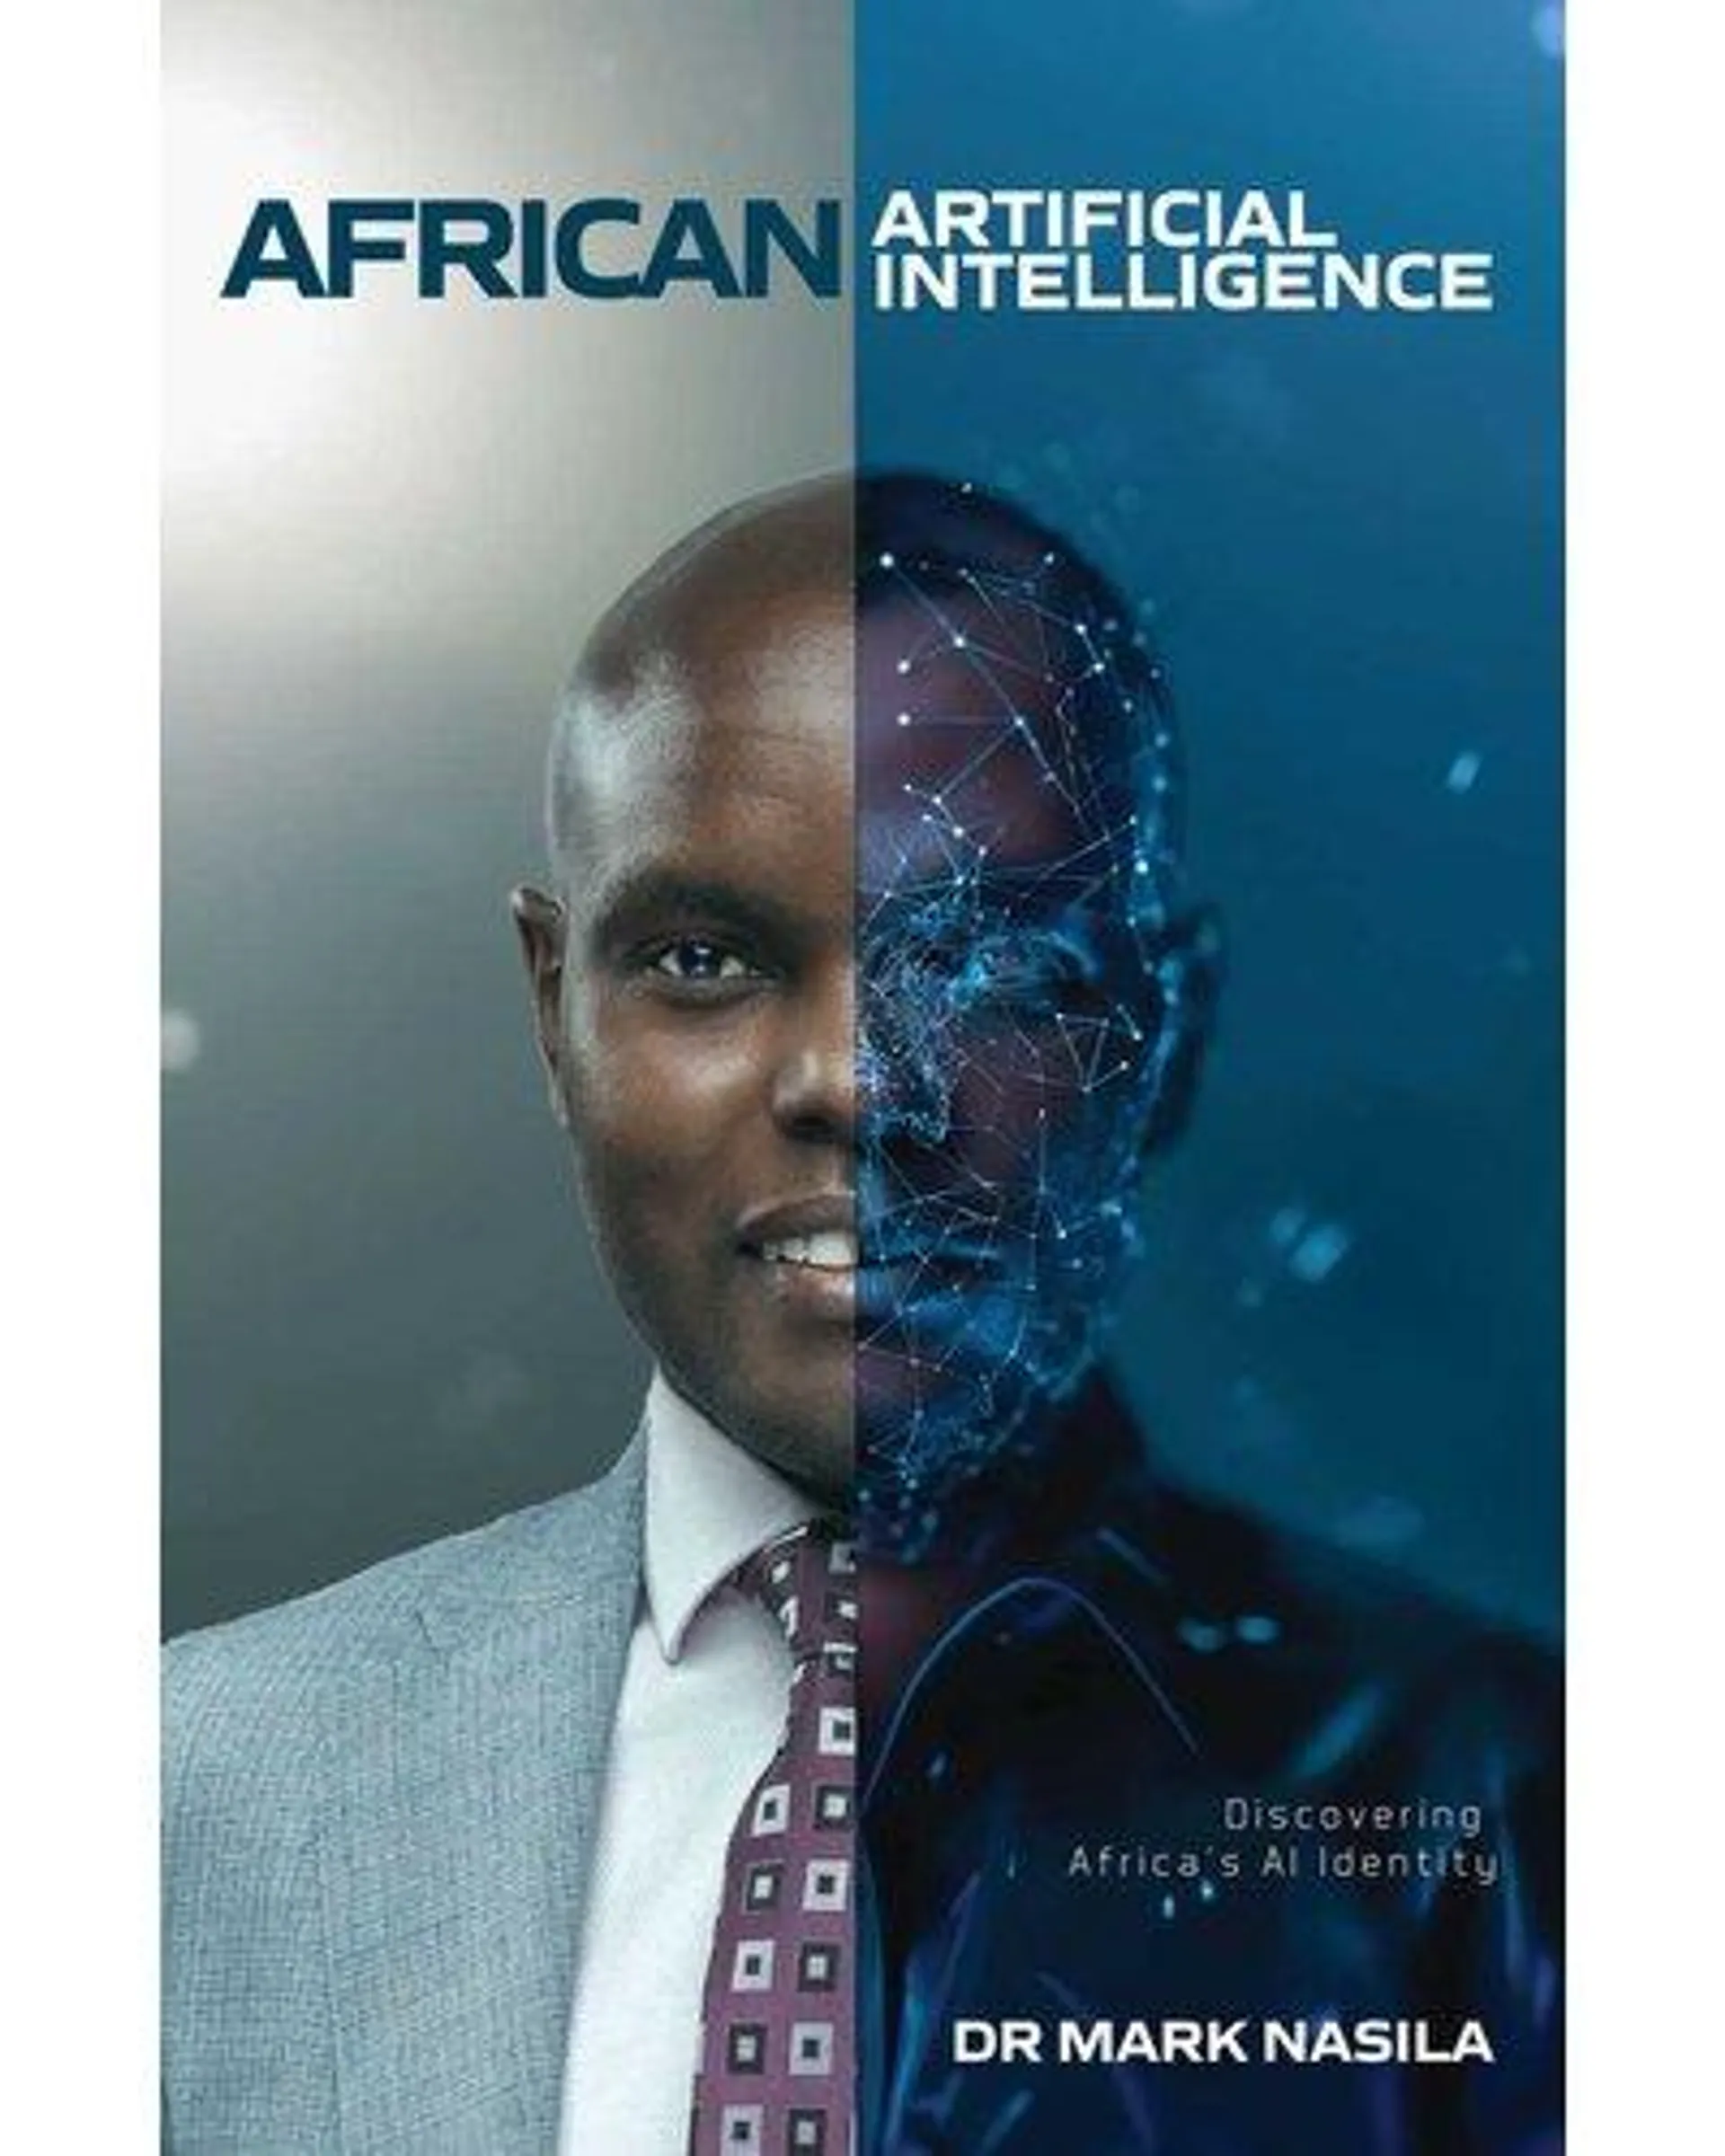 African Artificial Intelligence - Discovering Africa's AI Identity (Paperback)